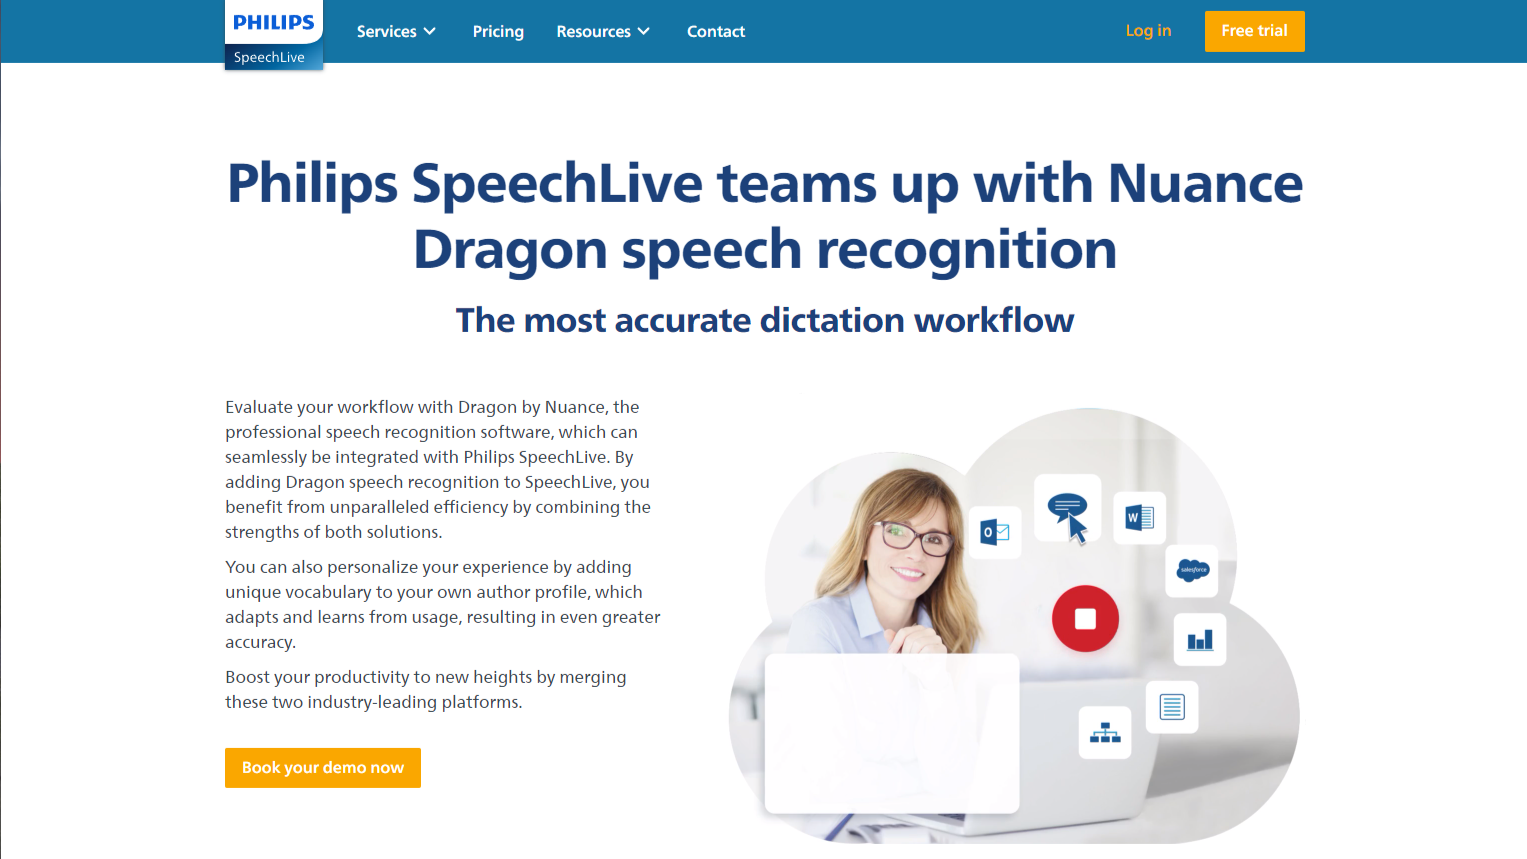 Are You A Dictator? Then Philips&#8217; New Integration with Nuance Dragon&#8217;s AI Speech Recognition May Be for You